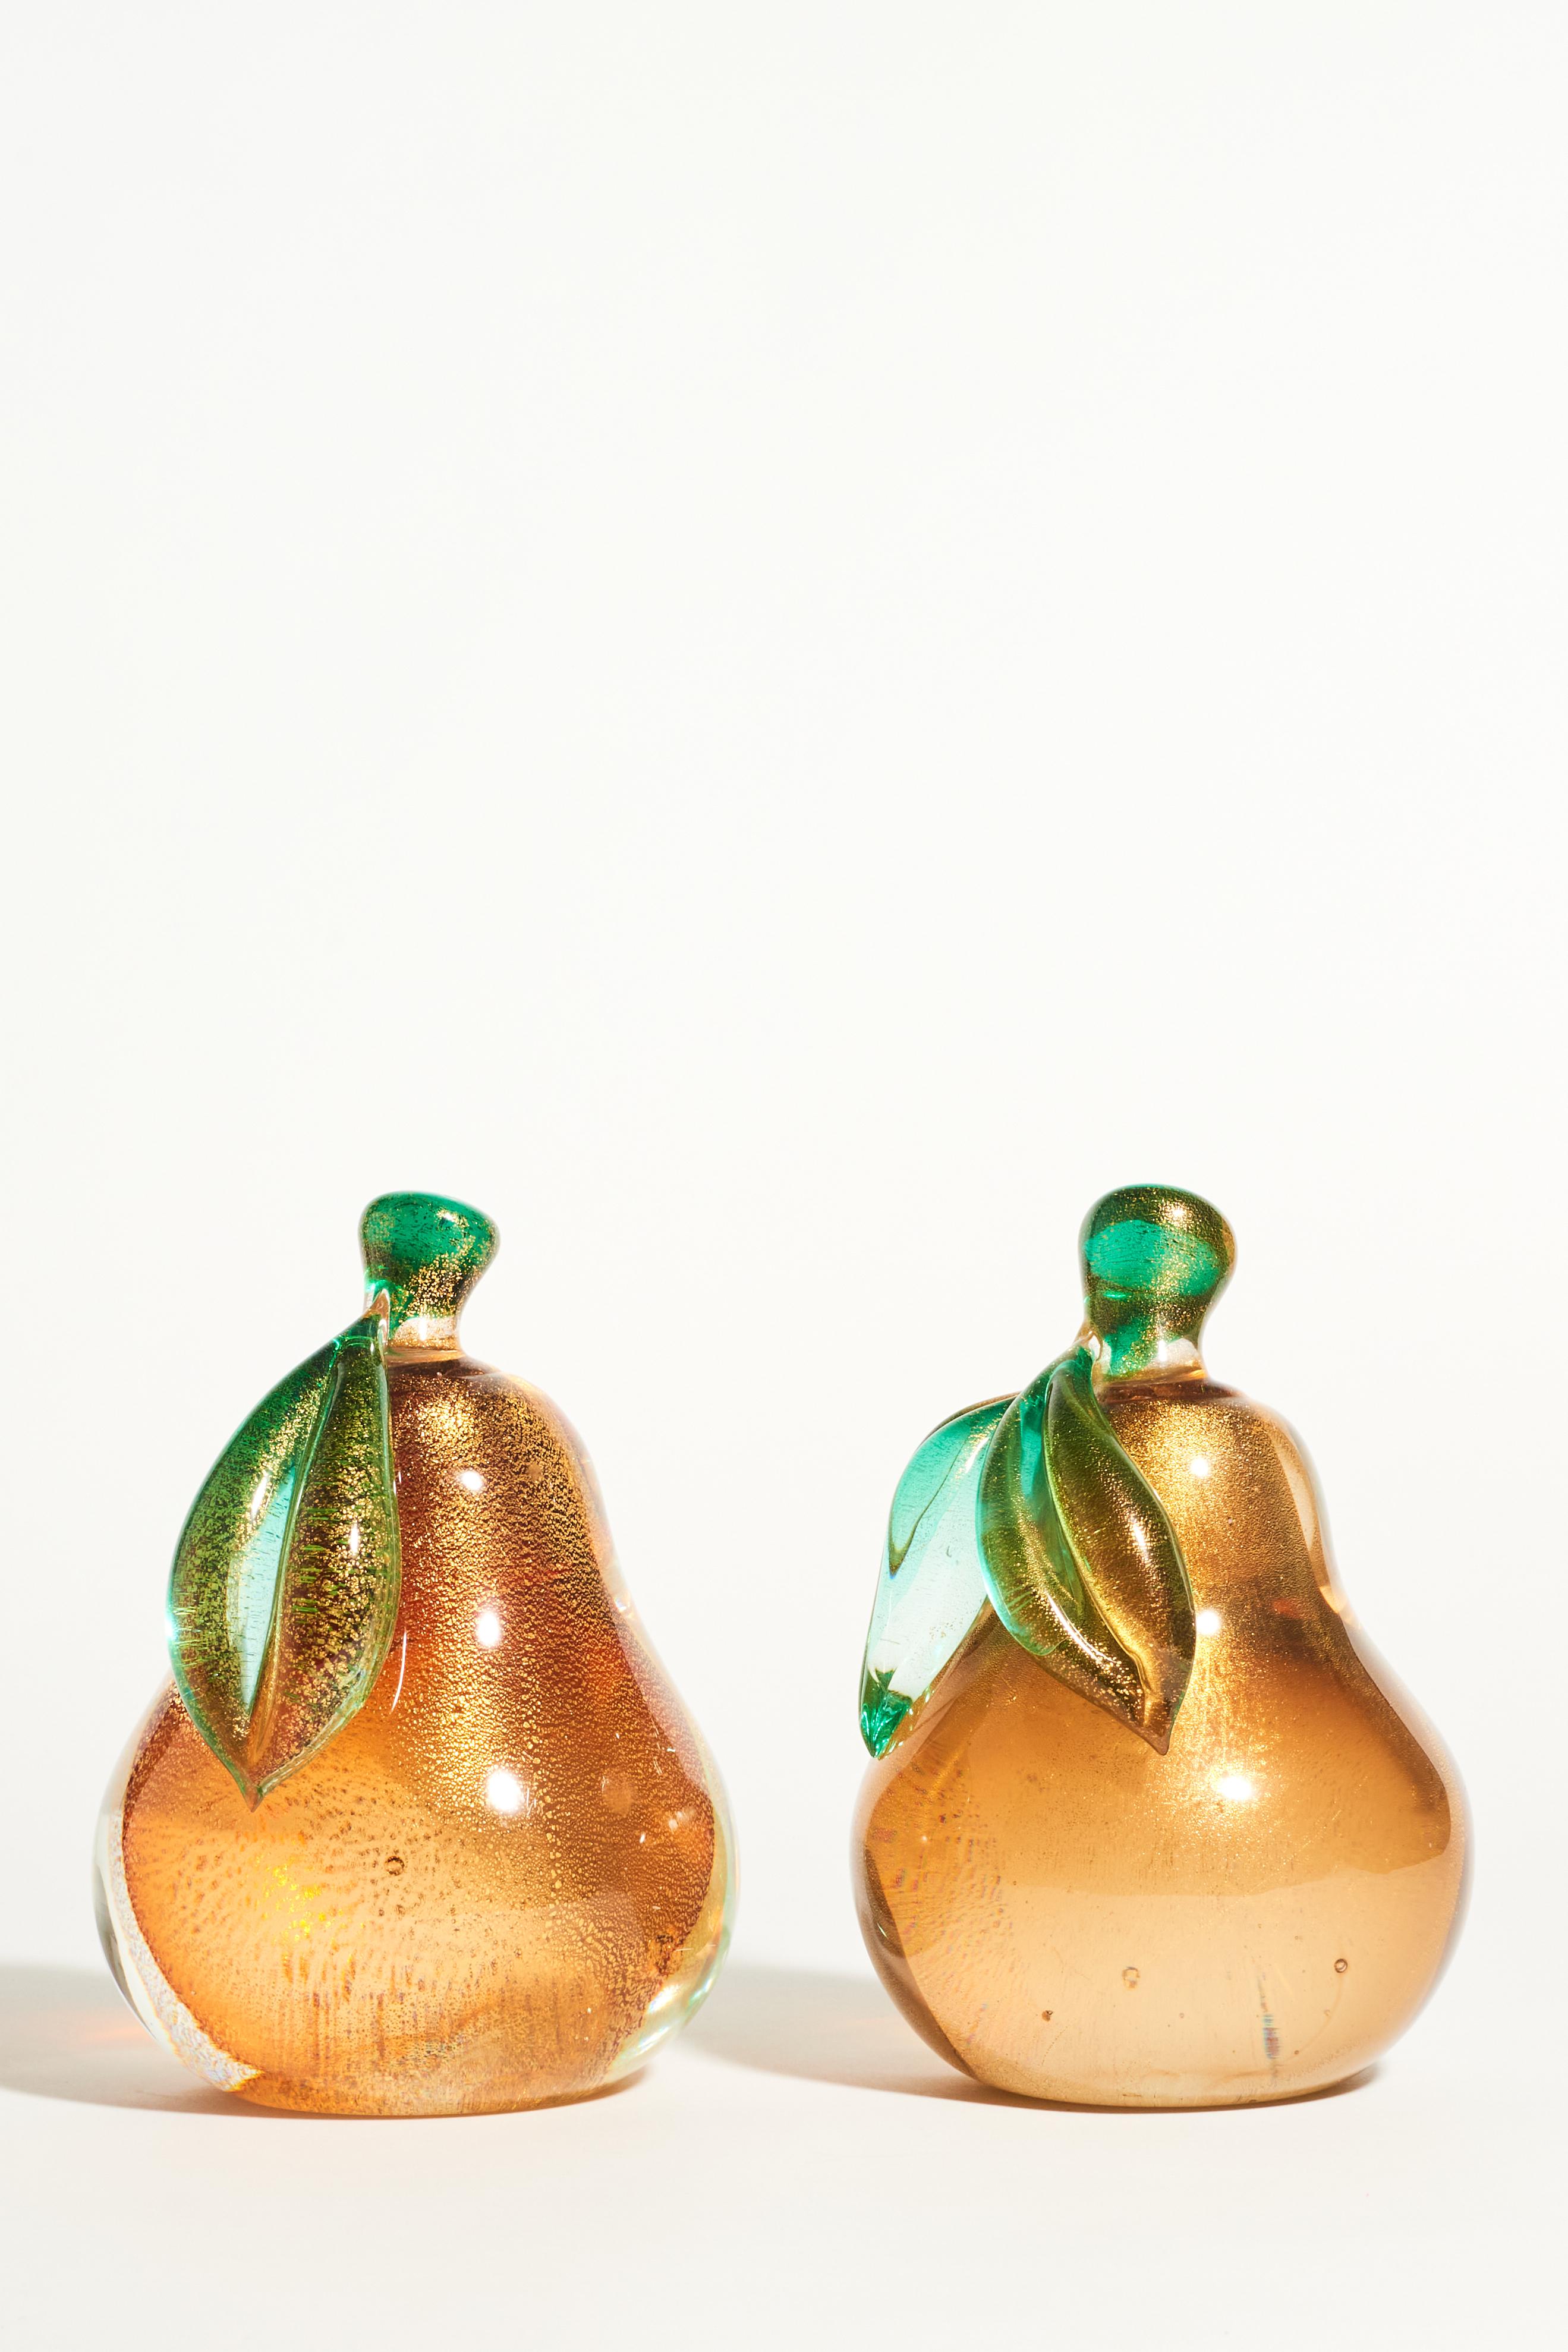 Large Murano glass bookends with deep golden amber and gold flecked interior green and gold flecked stems and leaves.
 